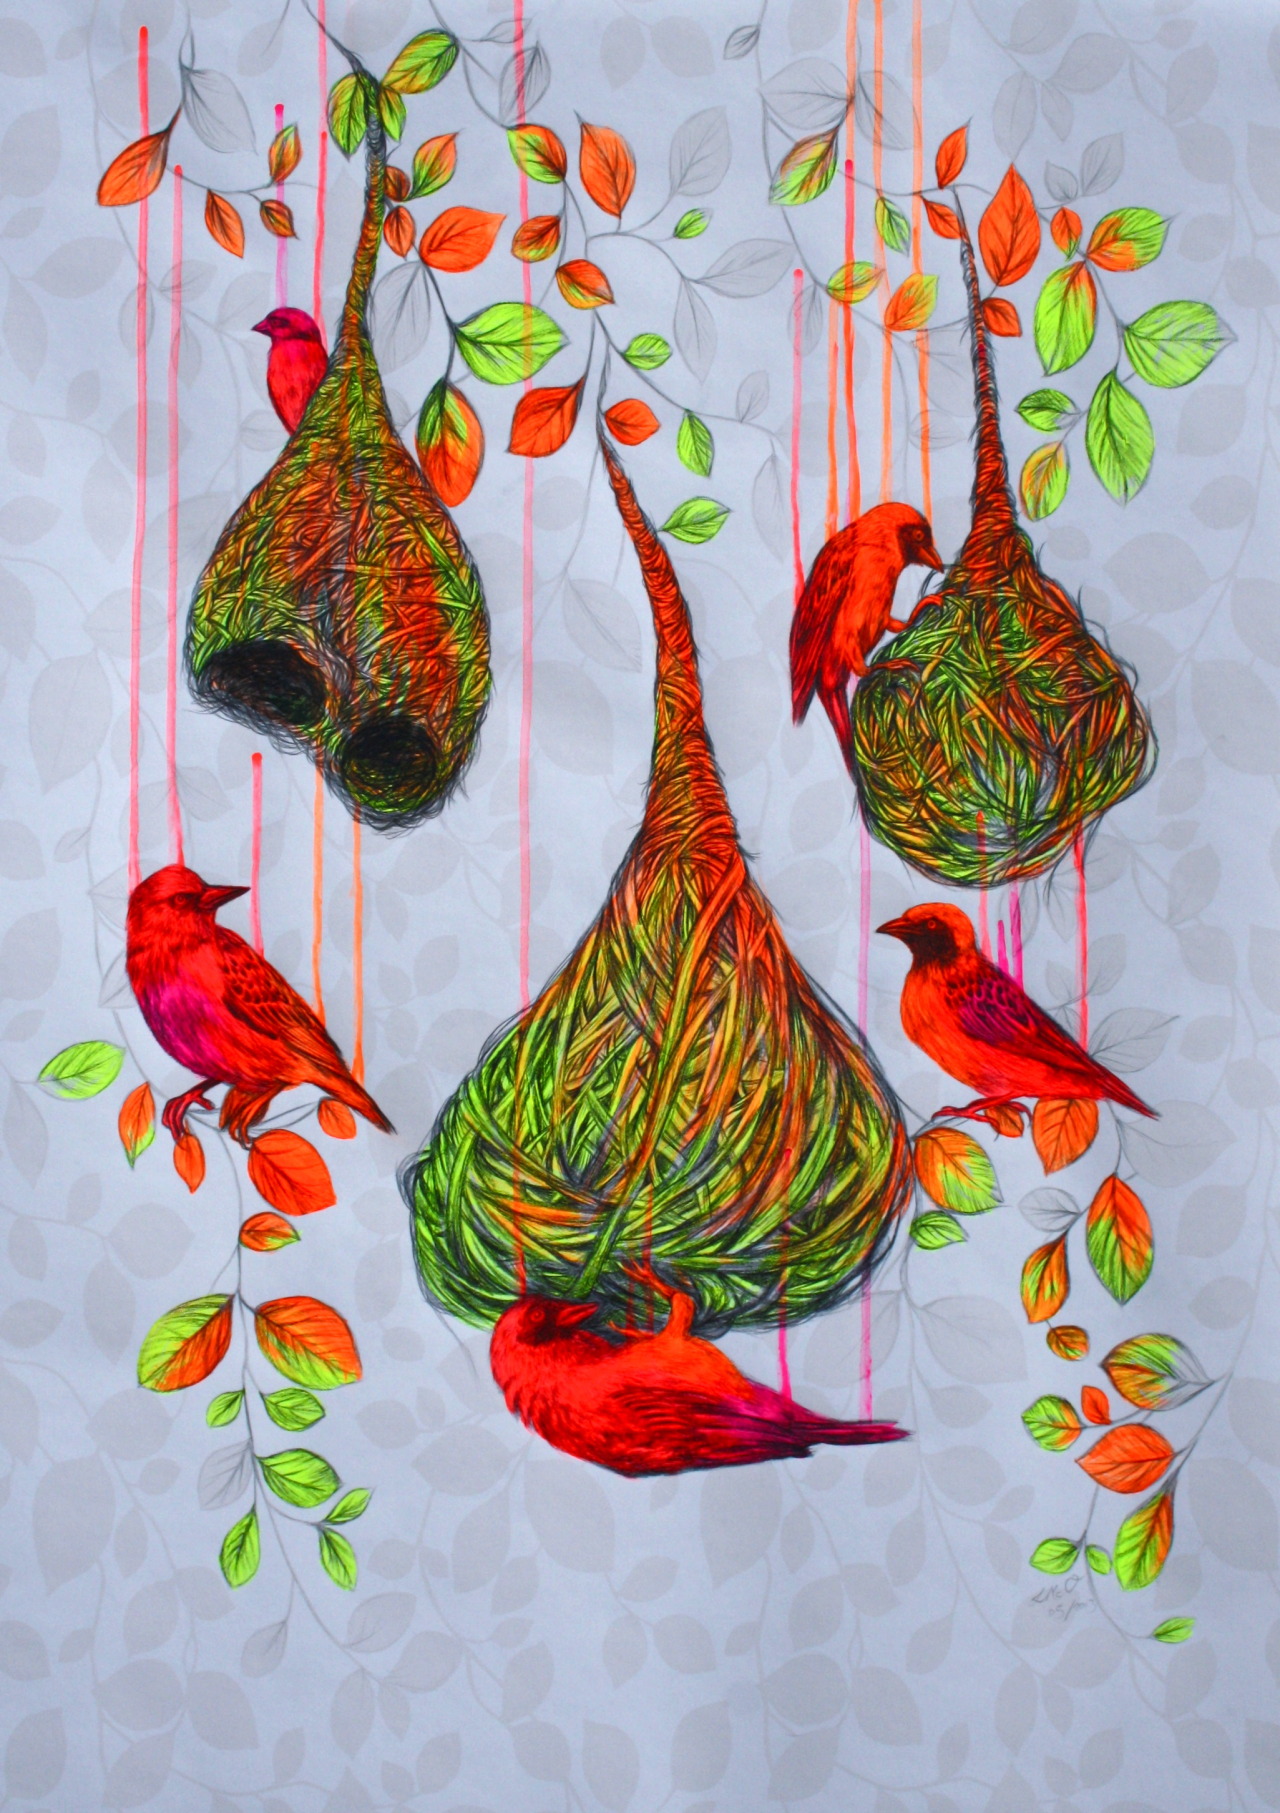 &lsquo;Wild Neighborhood&rsquo;, acrylic and pencil on wallpaper, 65x55cm (20130 by Louise McNaught